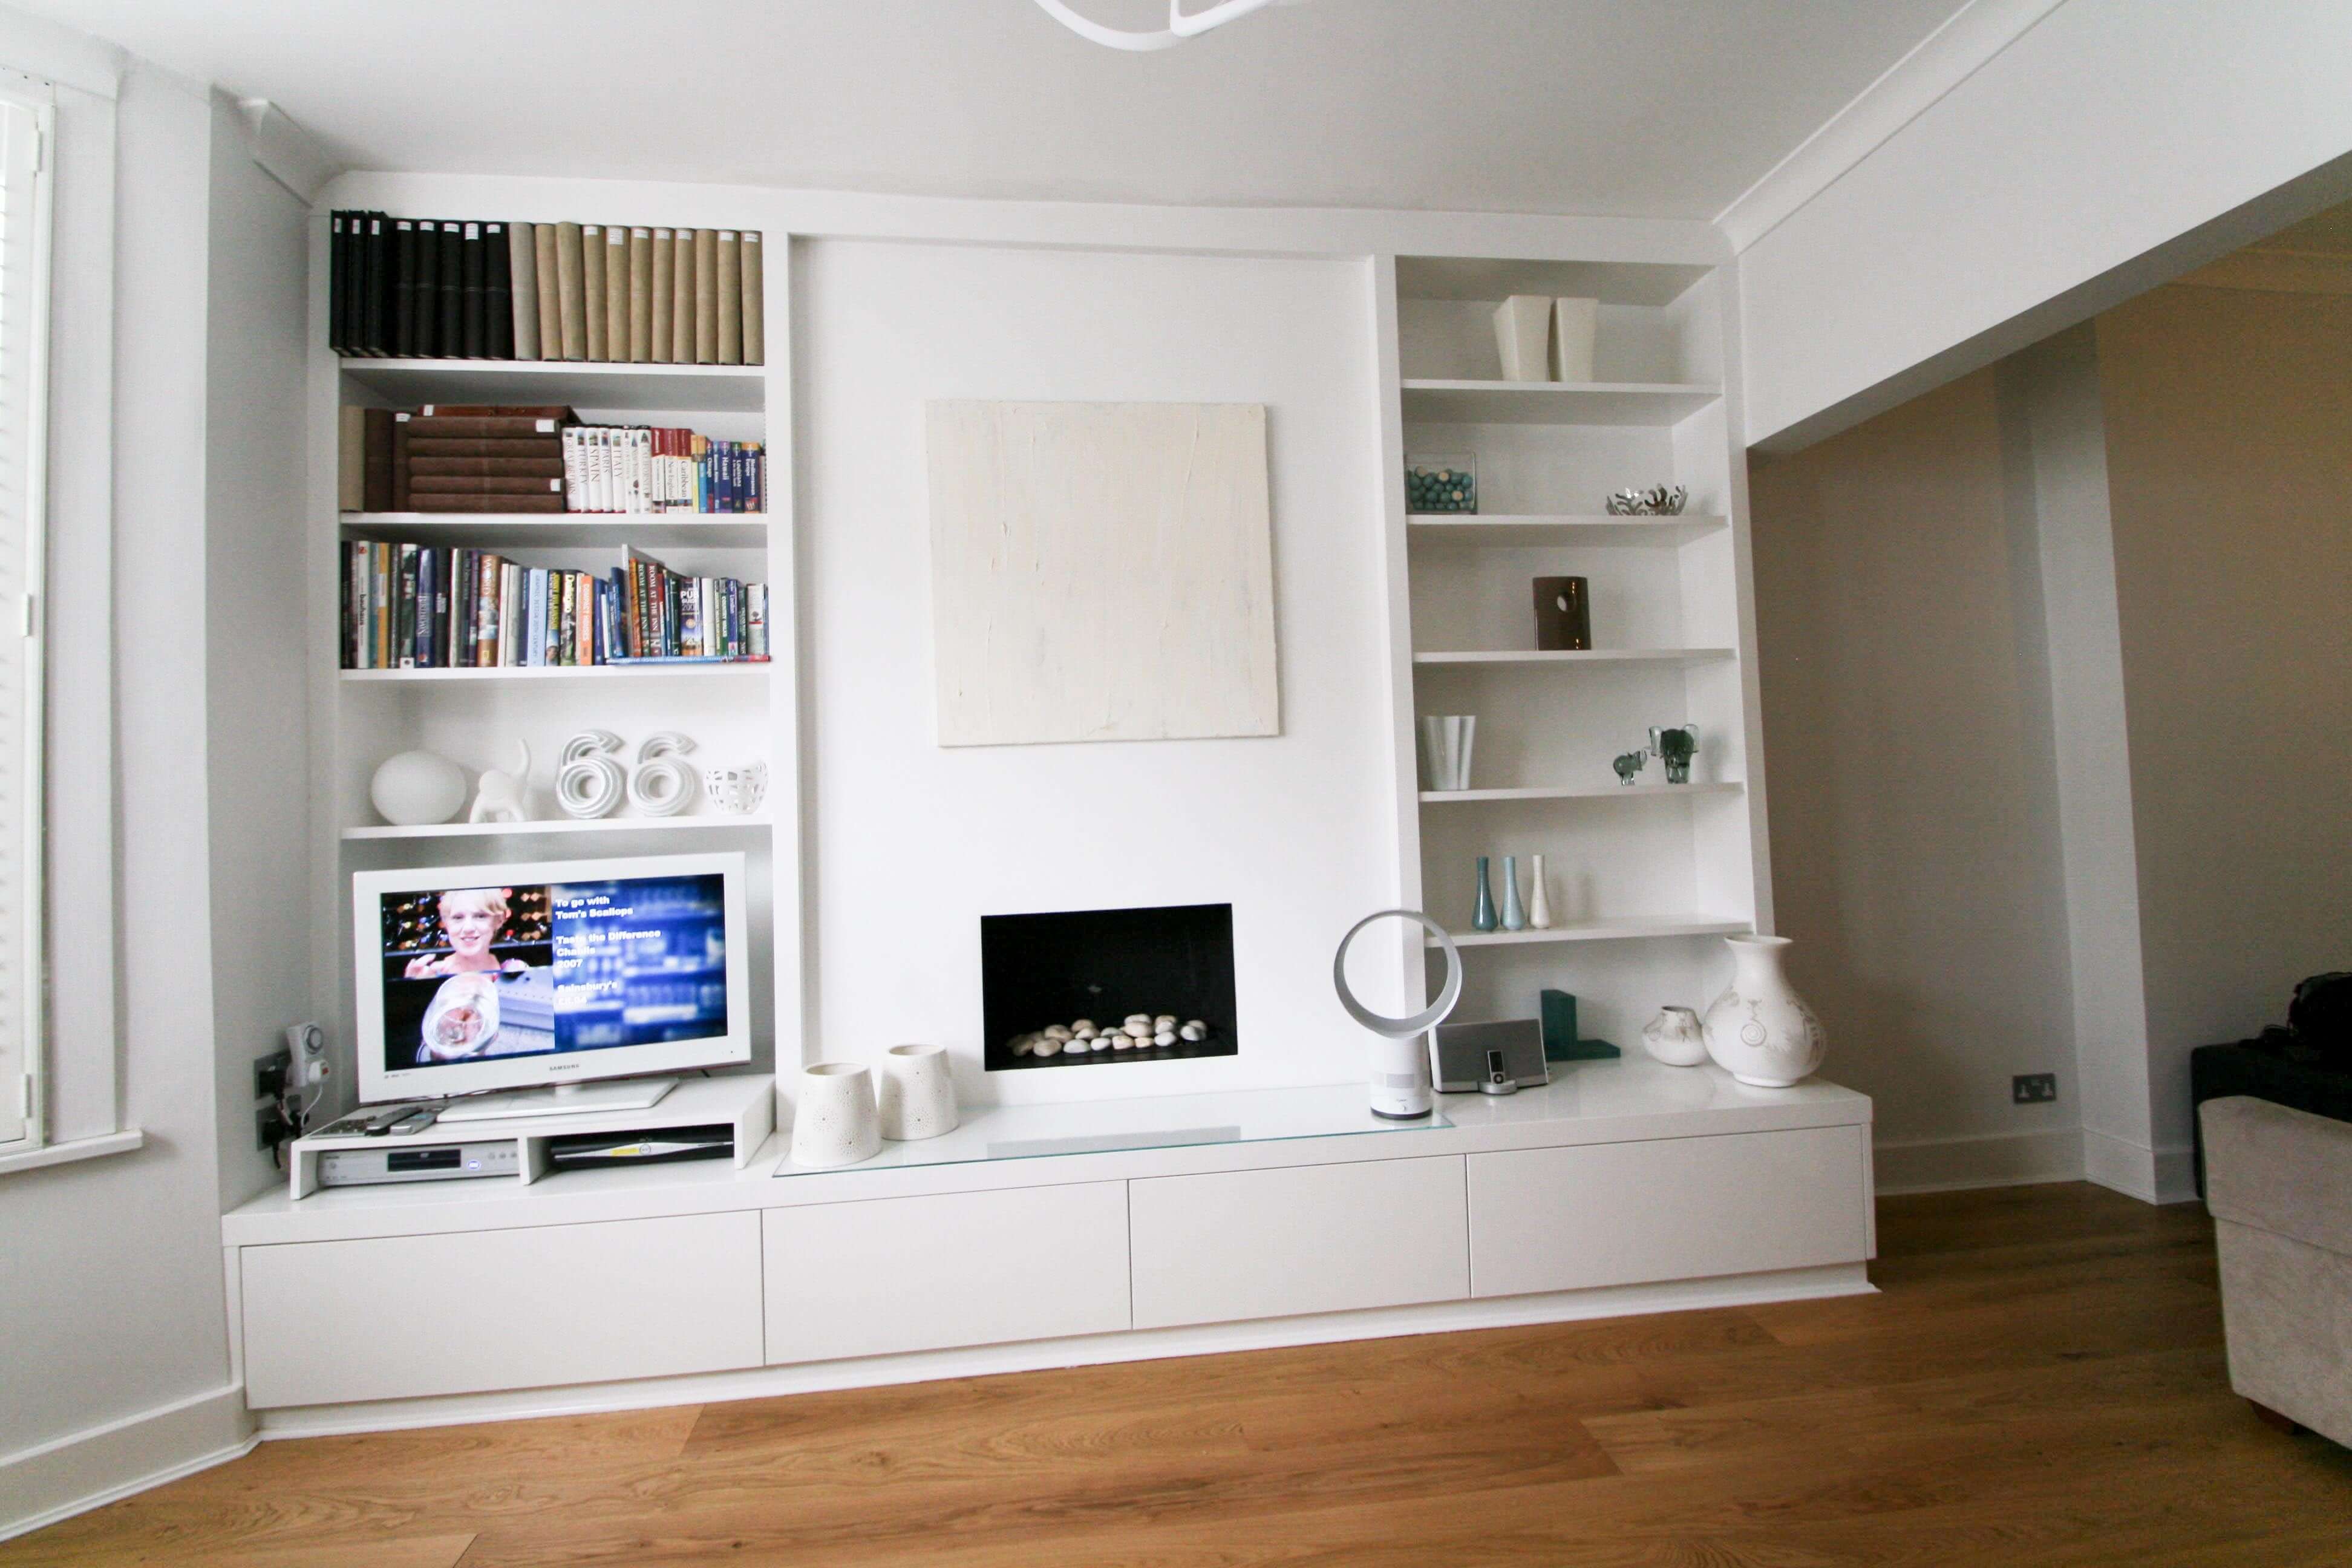 Alcove Units London | Fitted Alcove Units London | Alcove Cupboards London